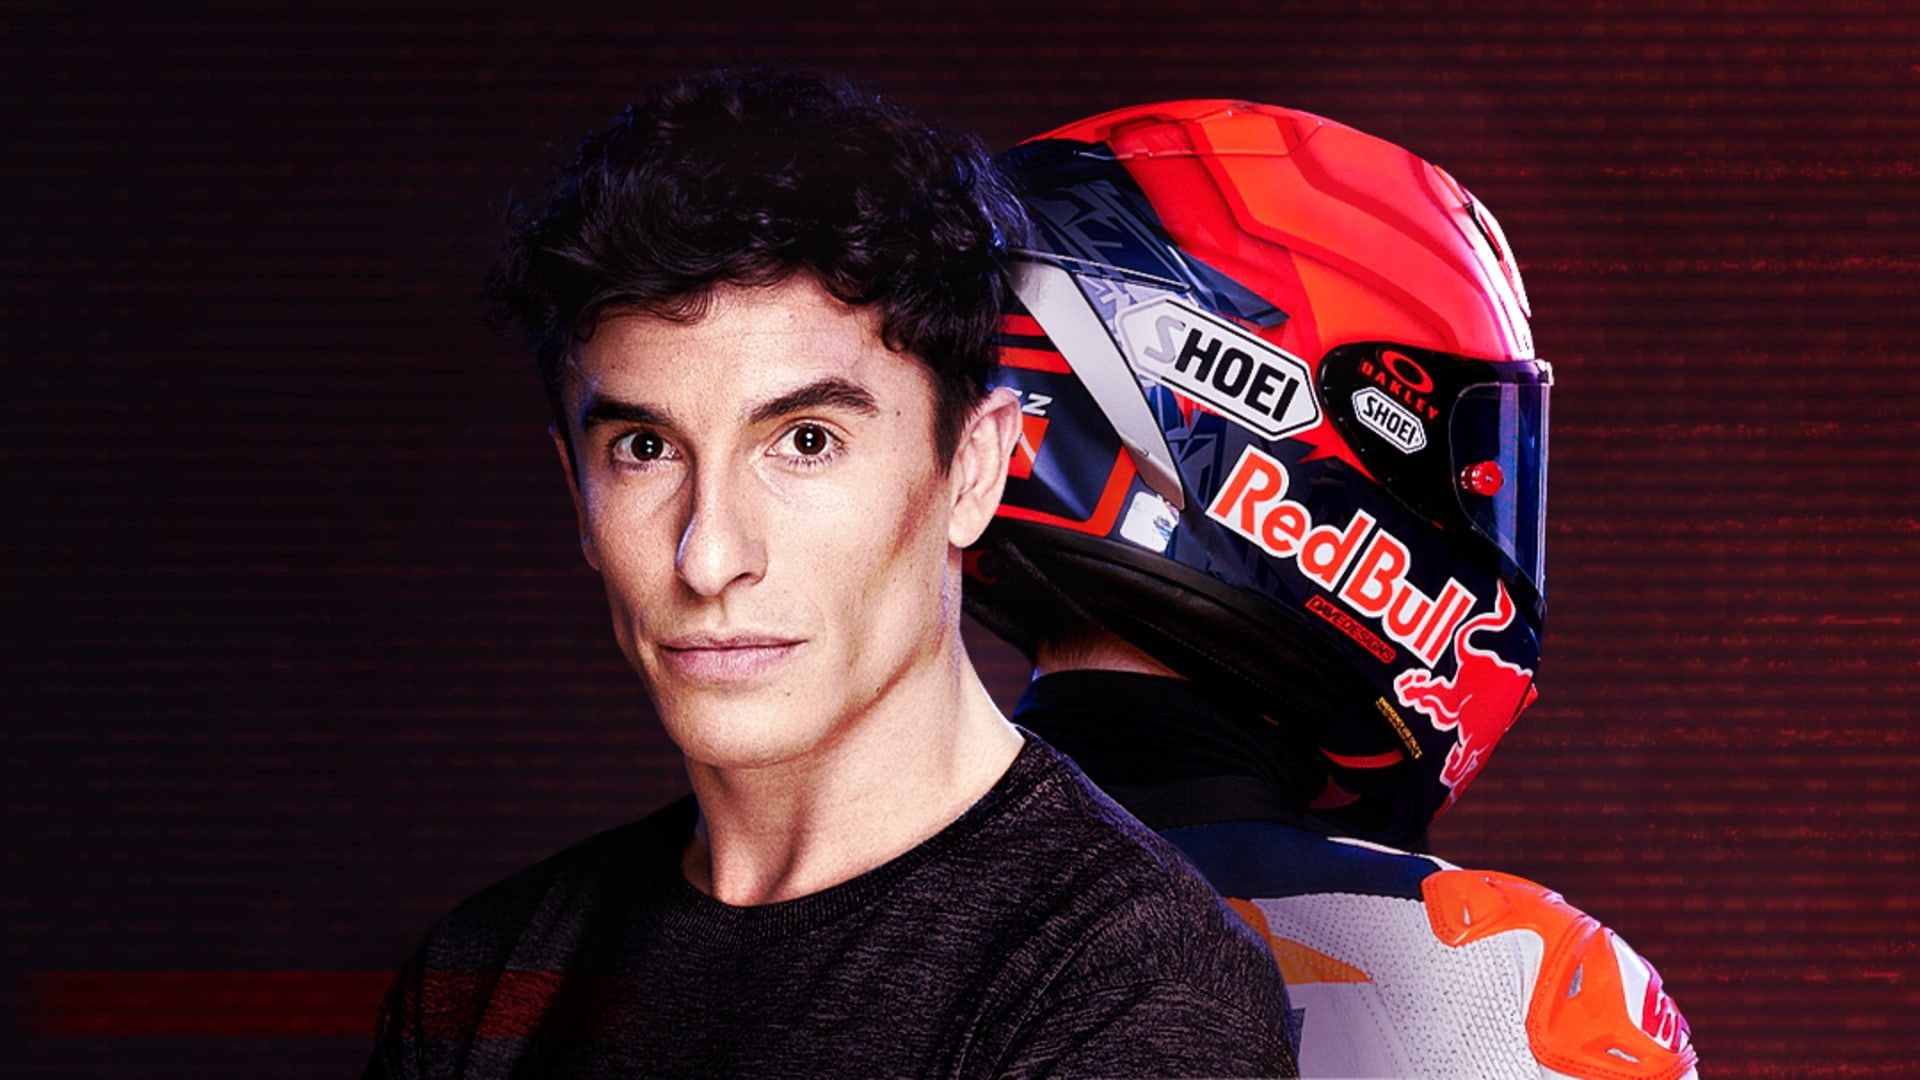 Marc Márquez – All In